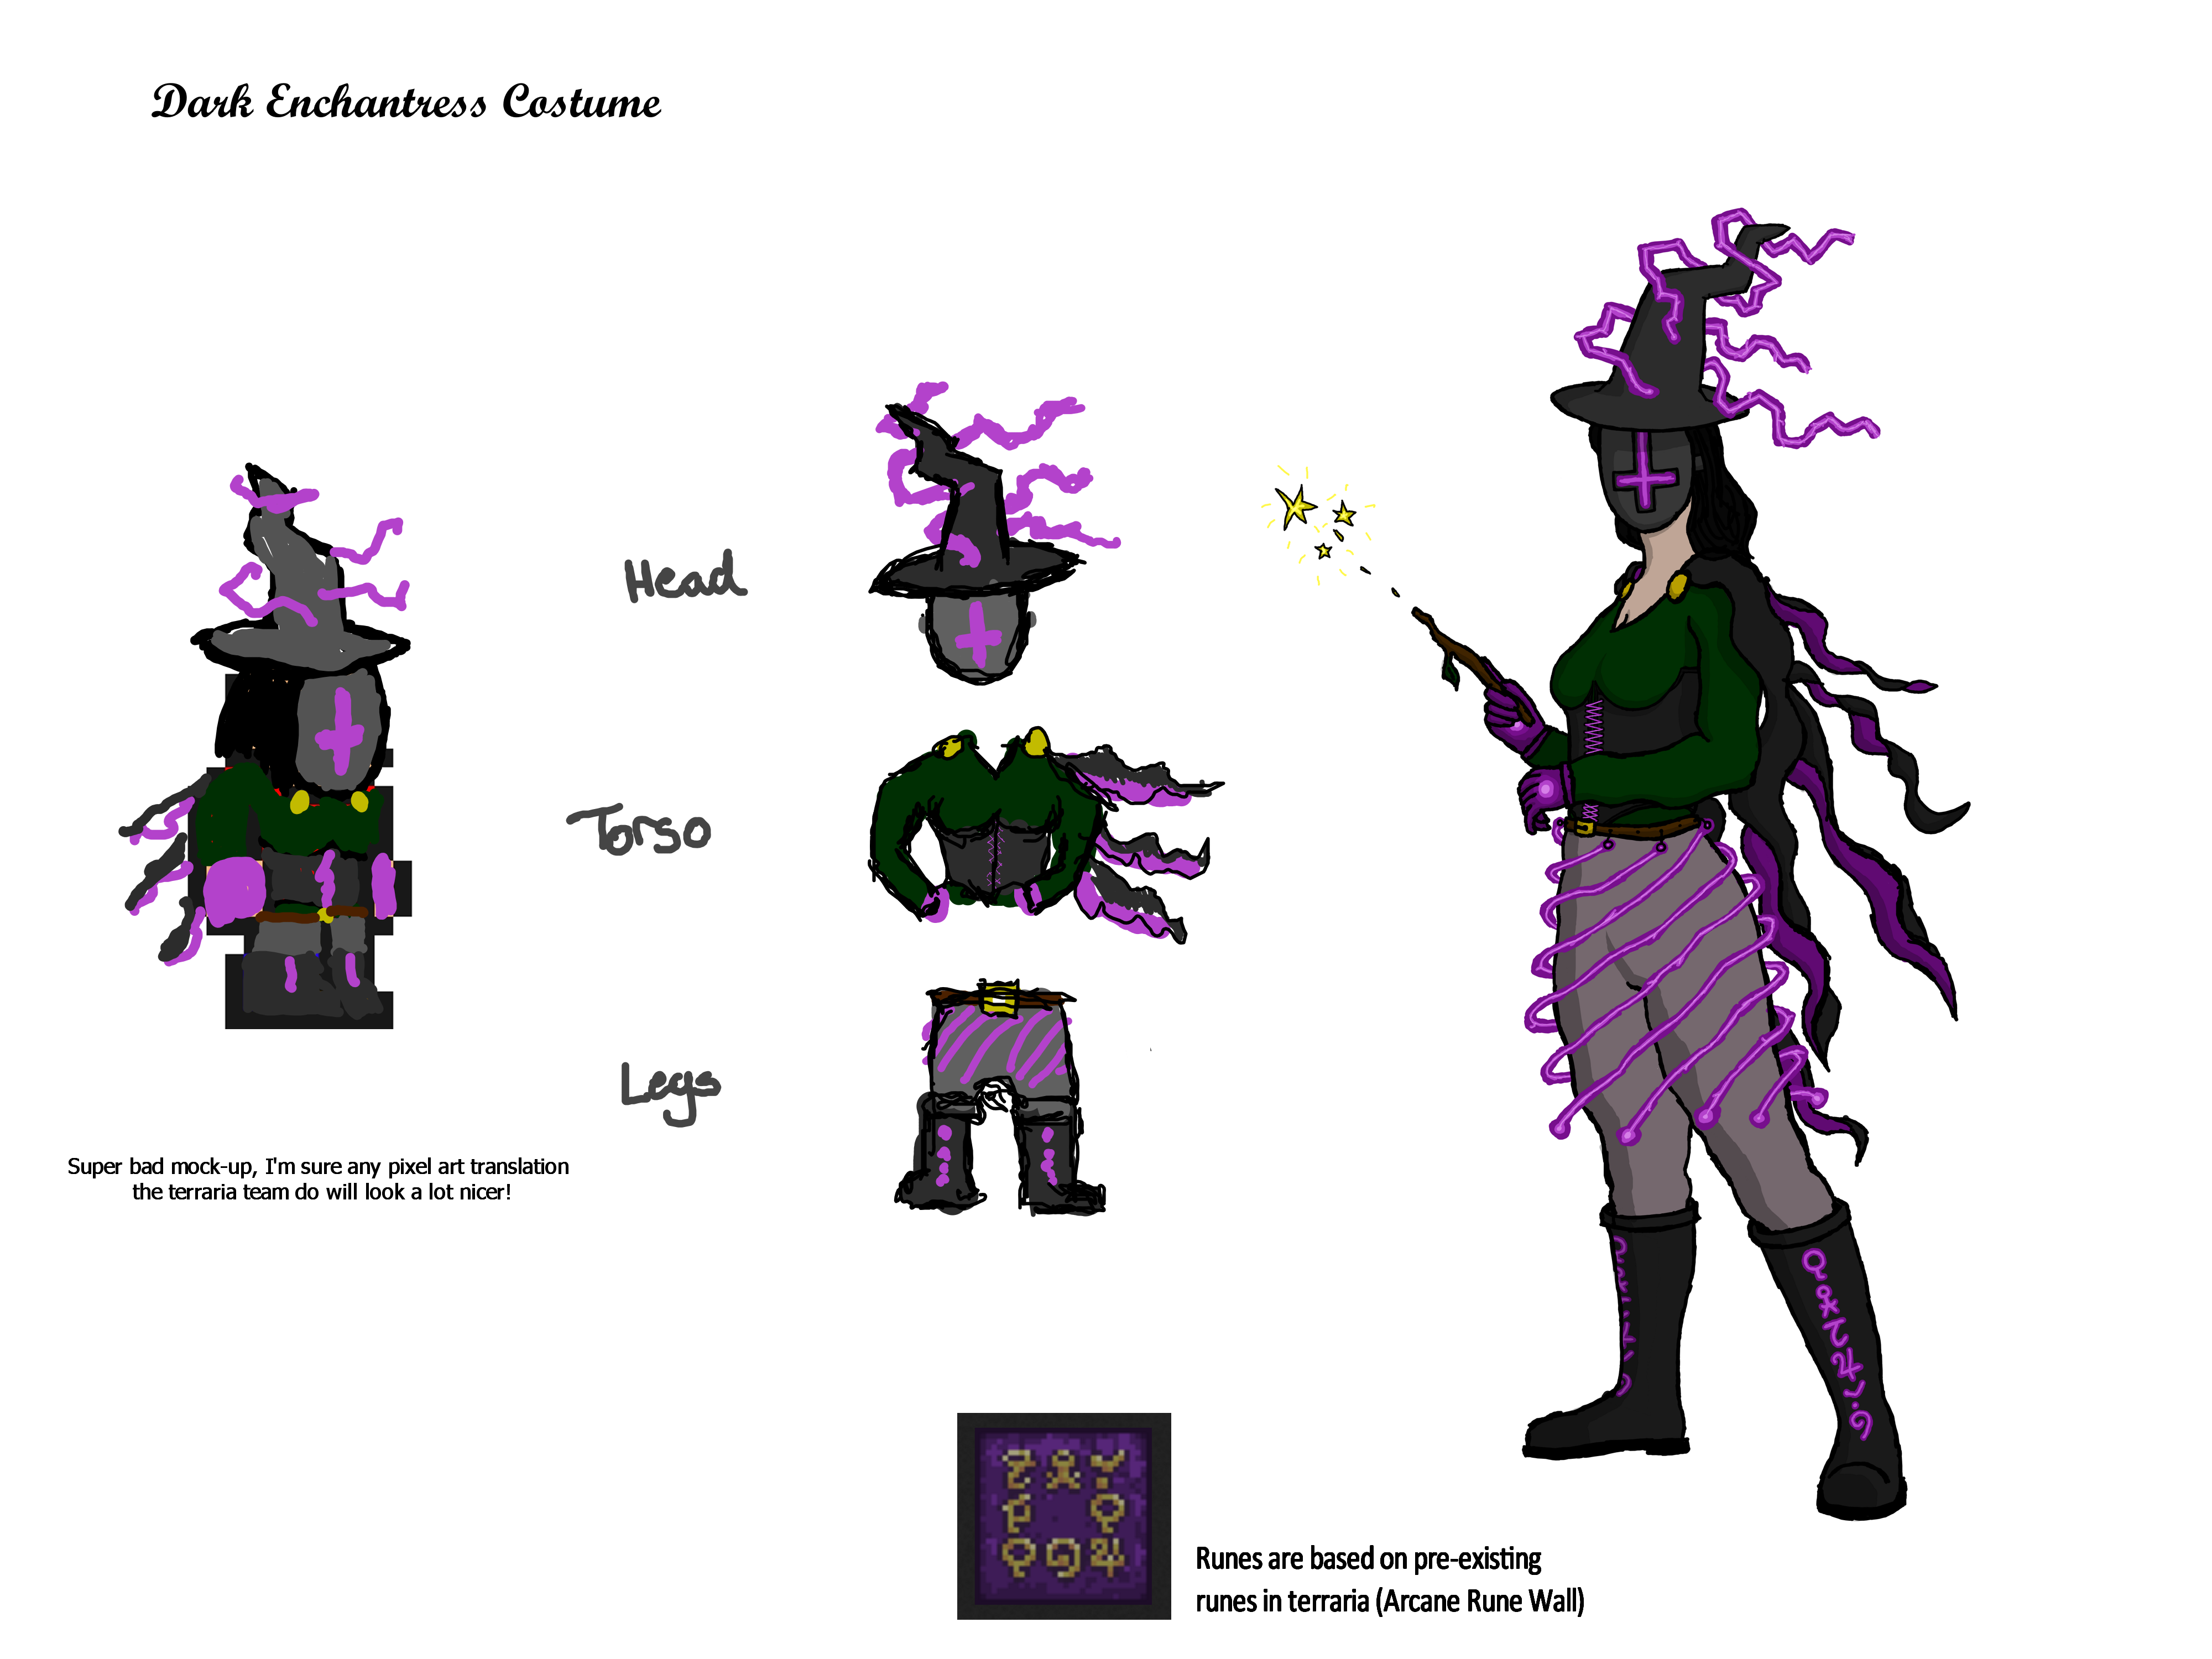 Terraria costume contest Details and mock up.png